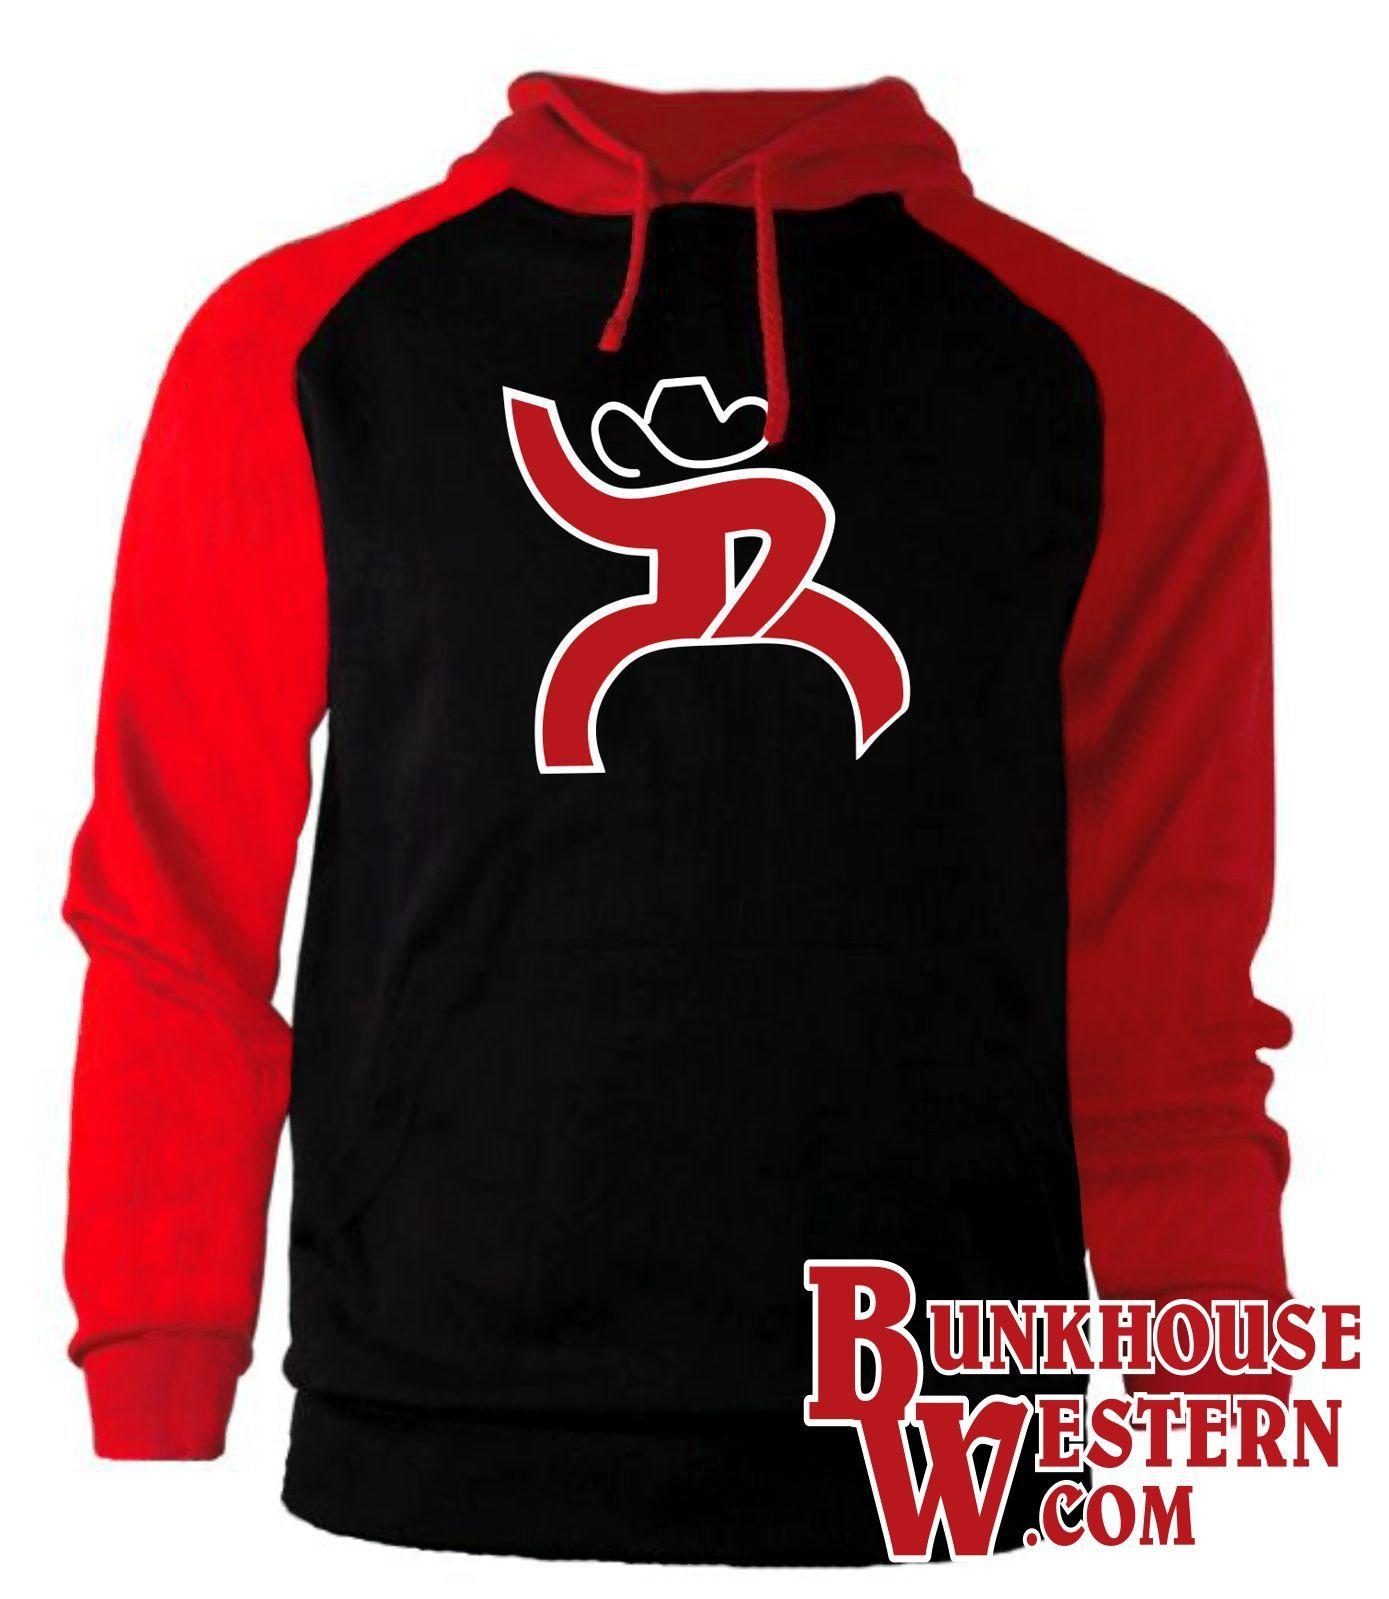 Red and Black Western Logo - Black & Red Roughy Mo Sweatshirt (S & 2XL only) | Hooey | Pinterest ...